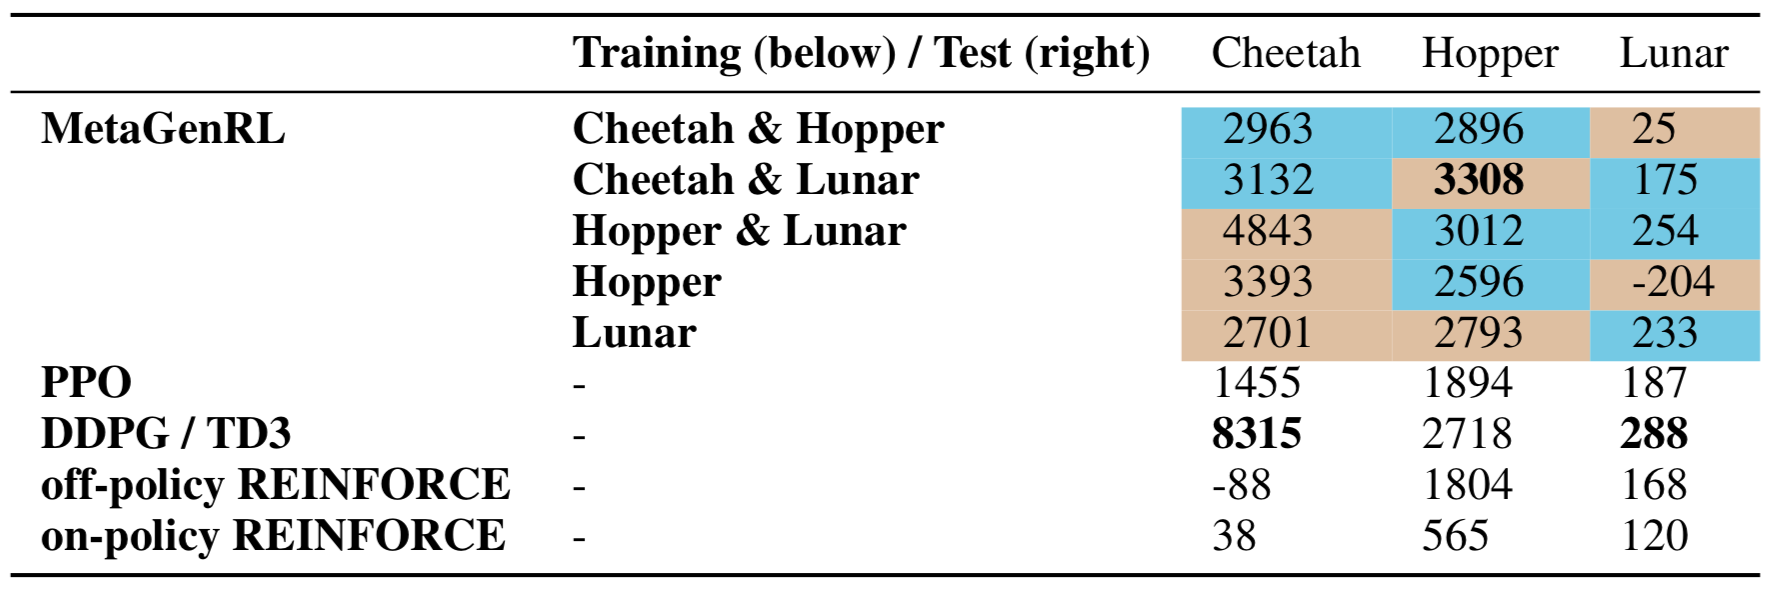 Agent mean return across seeds for meta-test training on previously seen environments (<span style='color: #74cae4;'>cyan</span>) and on unseen (different) environments (<span style='color: #debfa1;'>brown</span>) compared to human engineered baselines. MetaGenRL outperforms human-engineered algorithms such as PPO and REINFORCE but still struggles with DDPG.